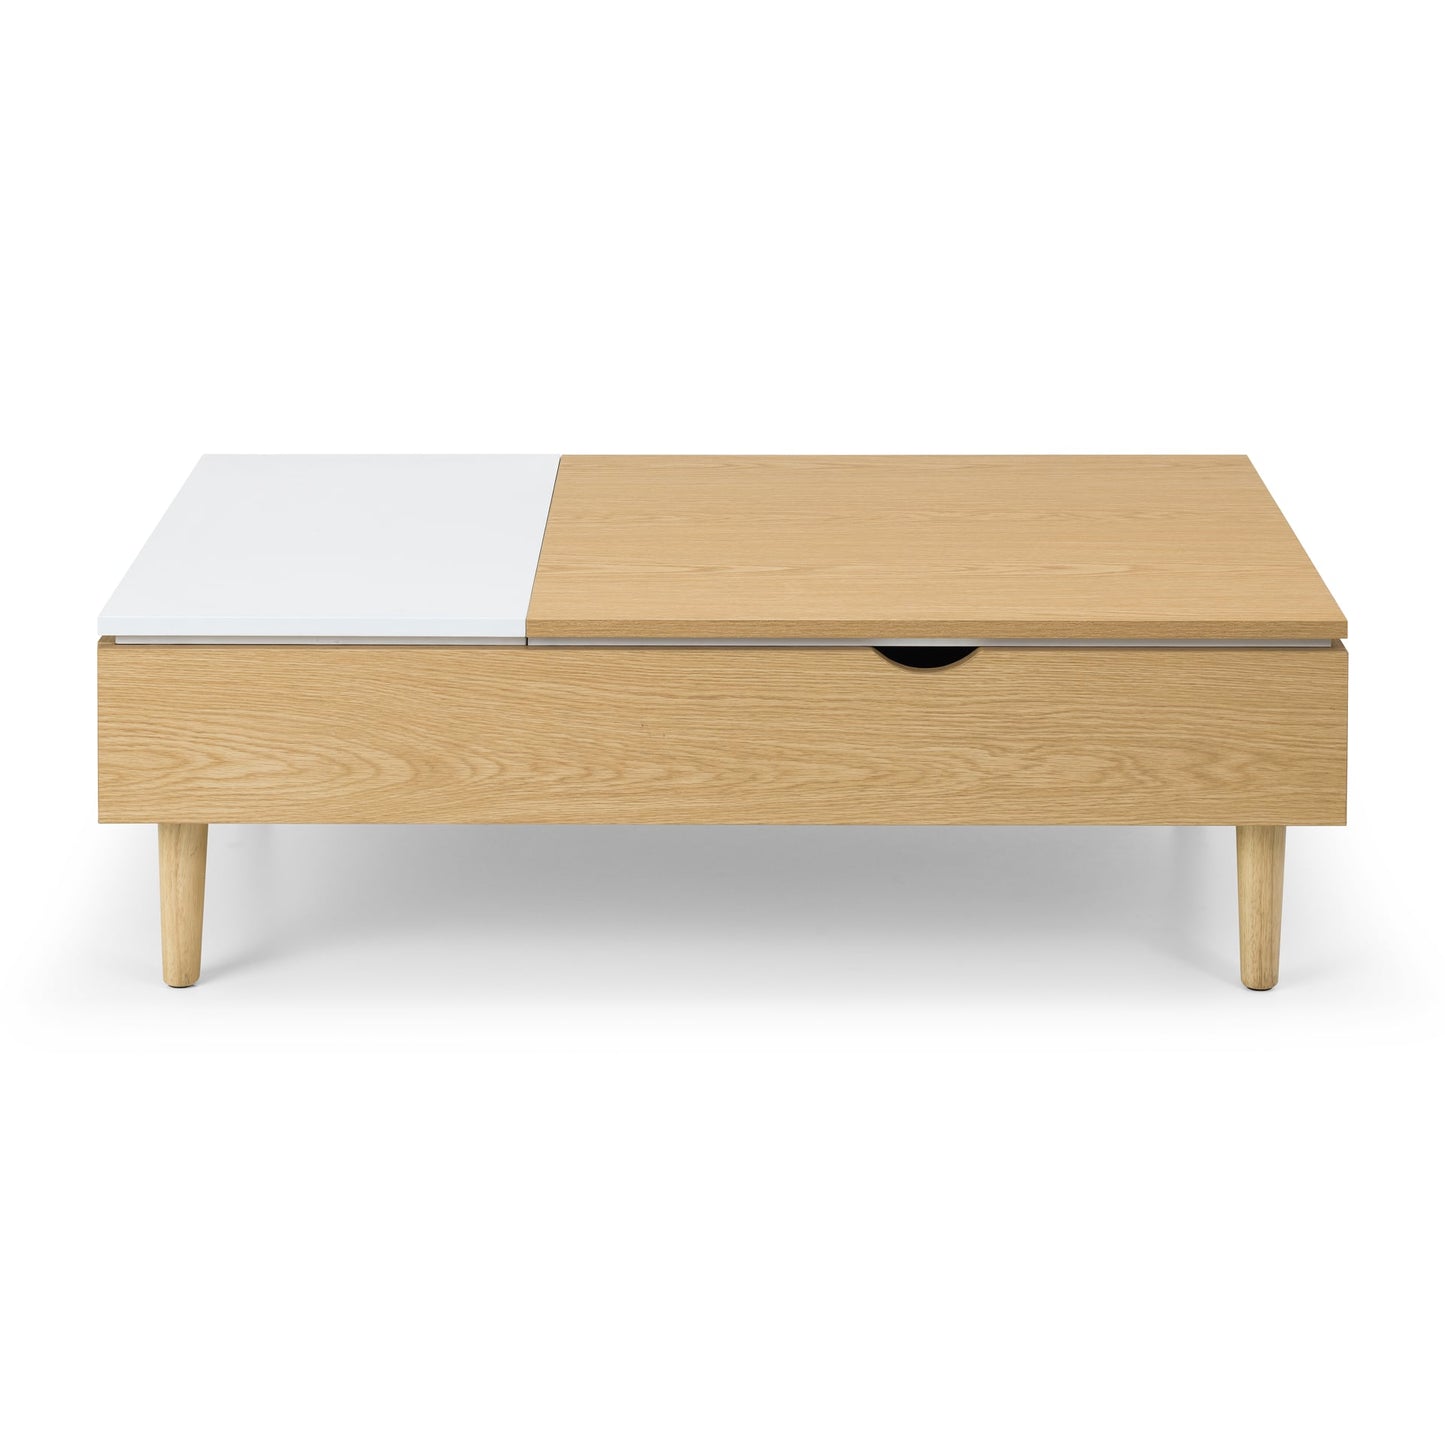 Latimer Lift-Up Coffee Table